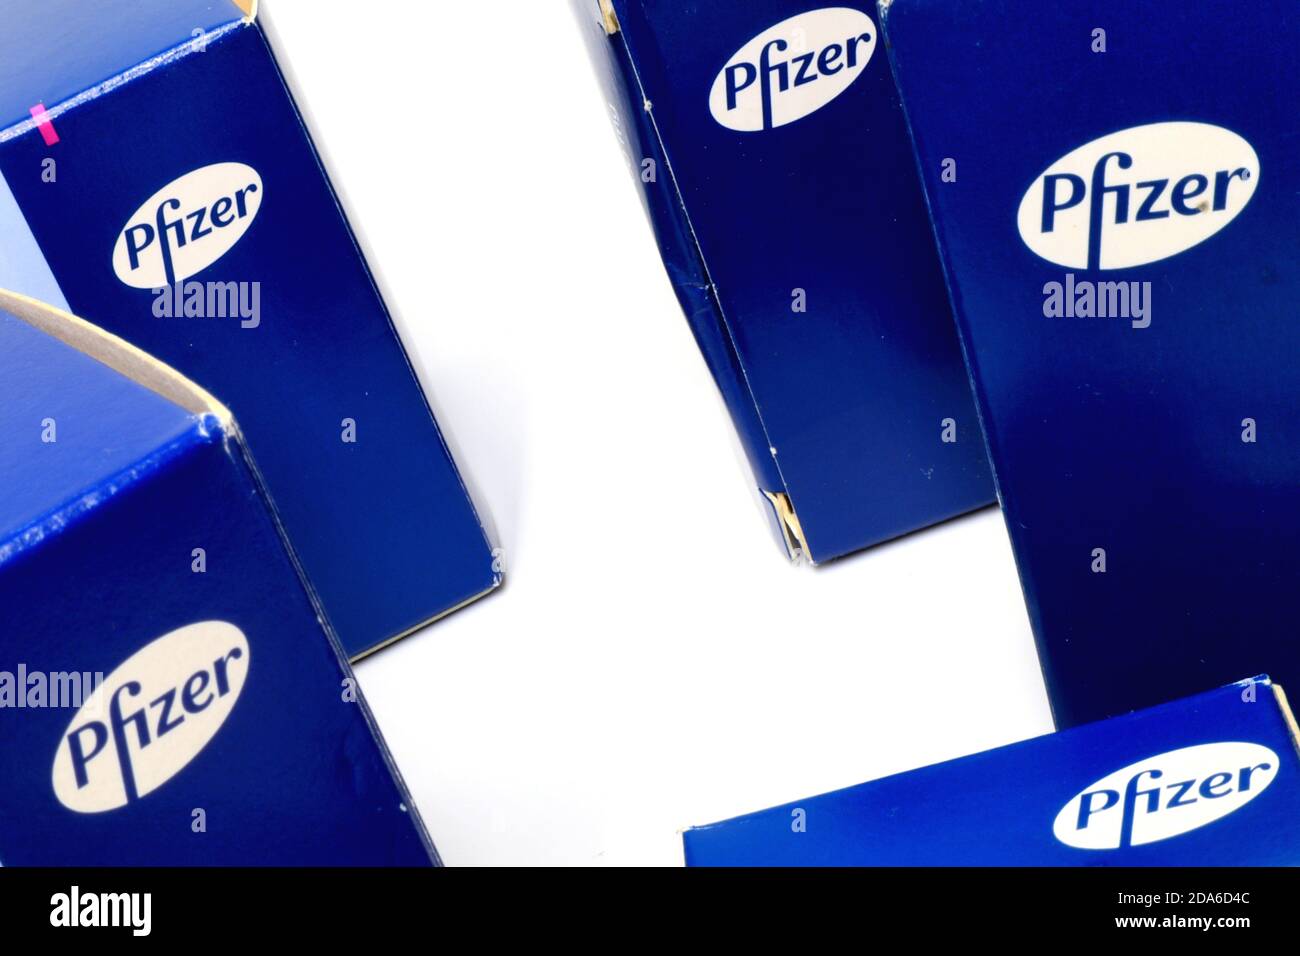 Pfizer logo on the medicine boxes. Pfizer inc. is an American Multinational Pharmaceutical Corporation Stock Photo